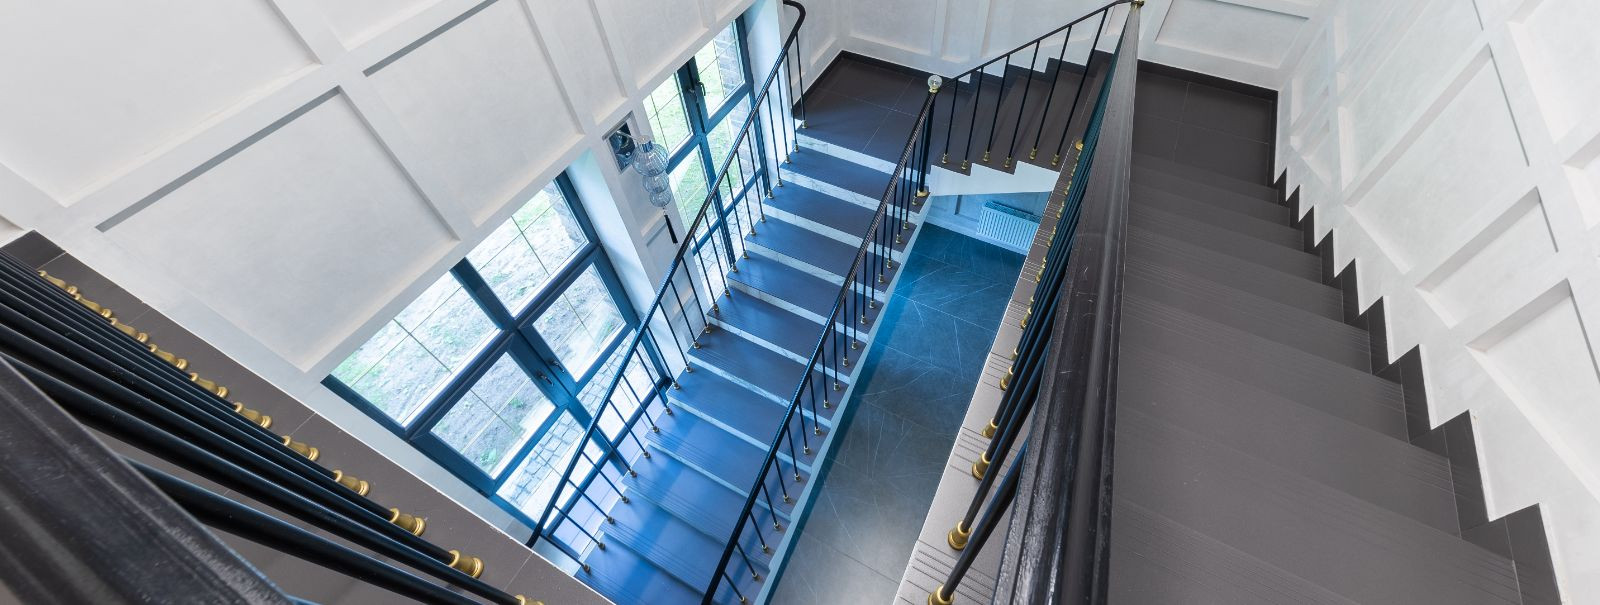 Stairwells are more than just functional spaces; they are the arteries of a building, providing safe passage between floors. A well-maintained stairwell can sig